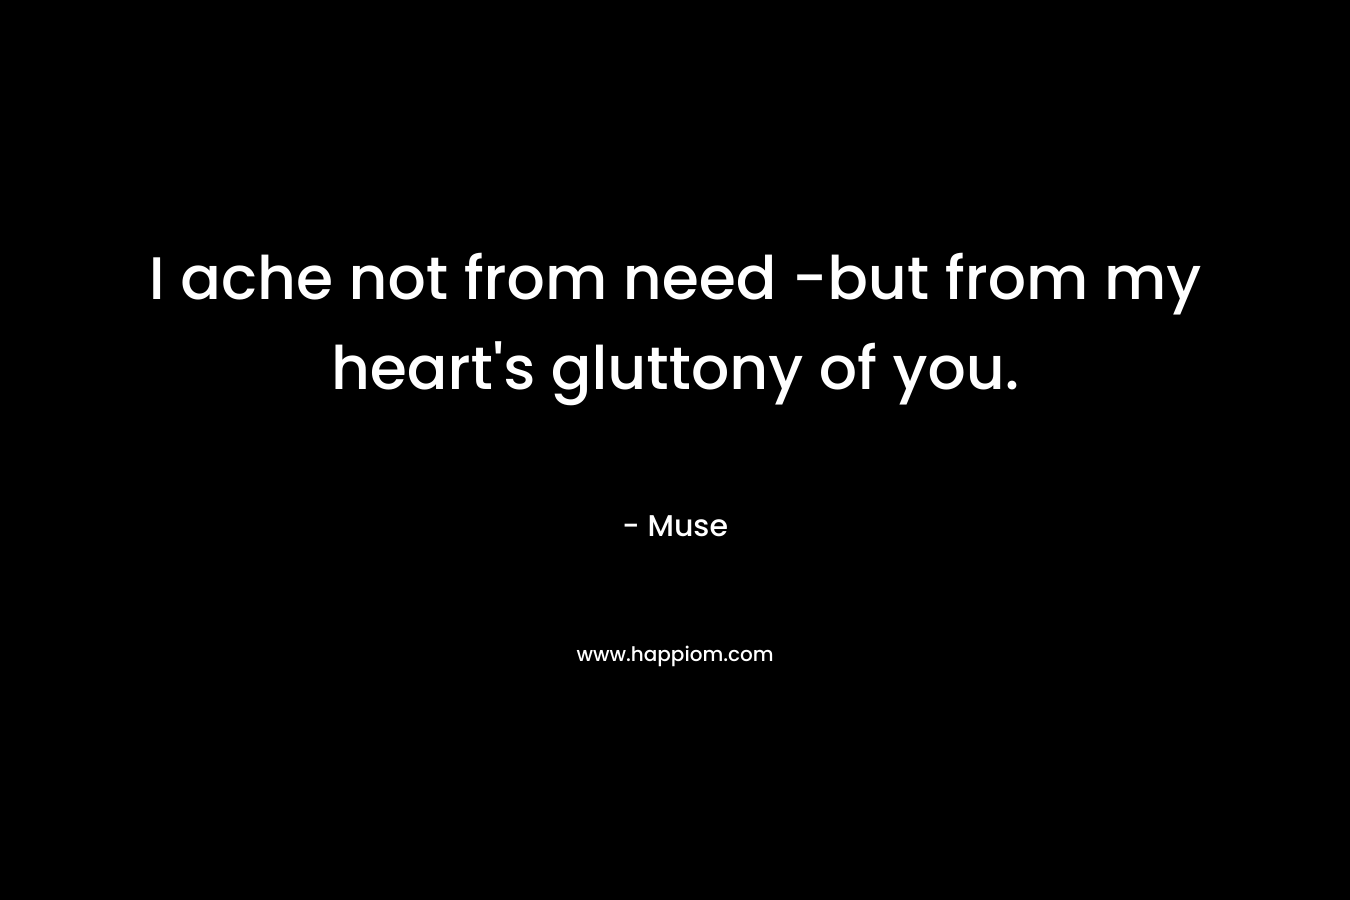 I ache not from need -but from my heart's gluttony of you.